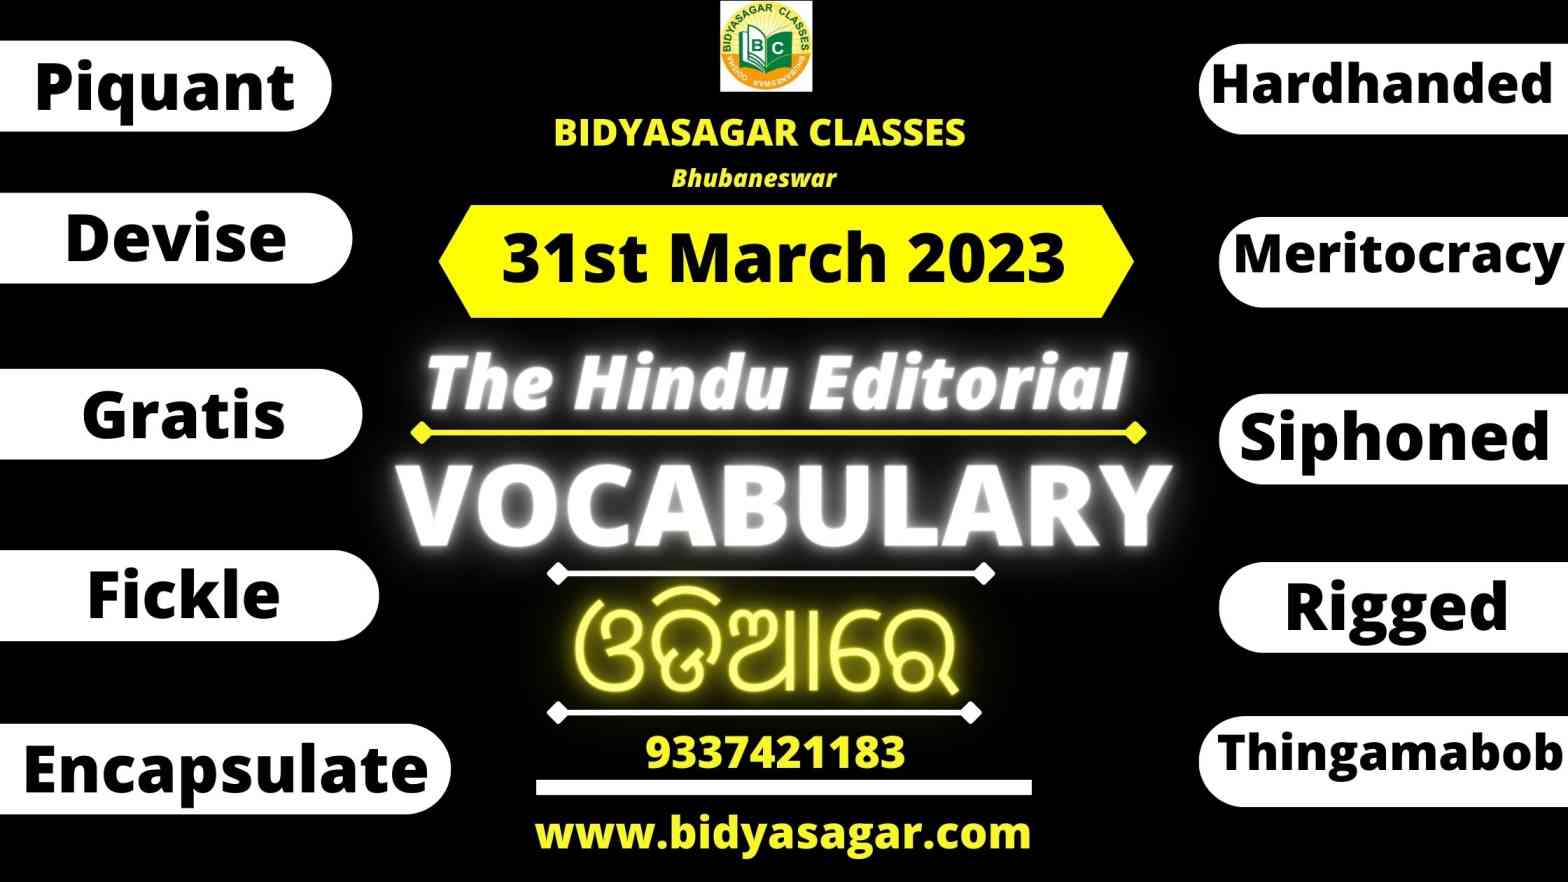 The Hindu Editorial Vocabulary of 31st March 2023